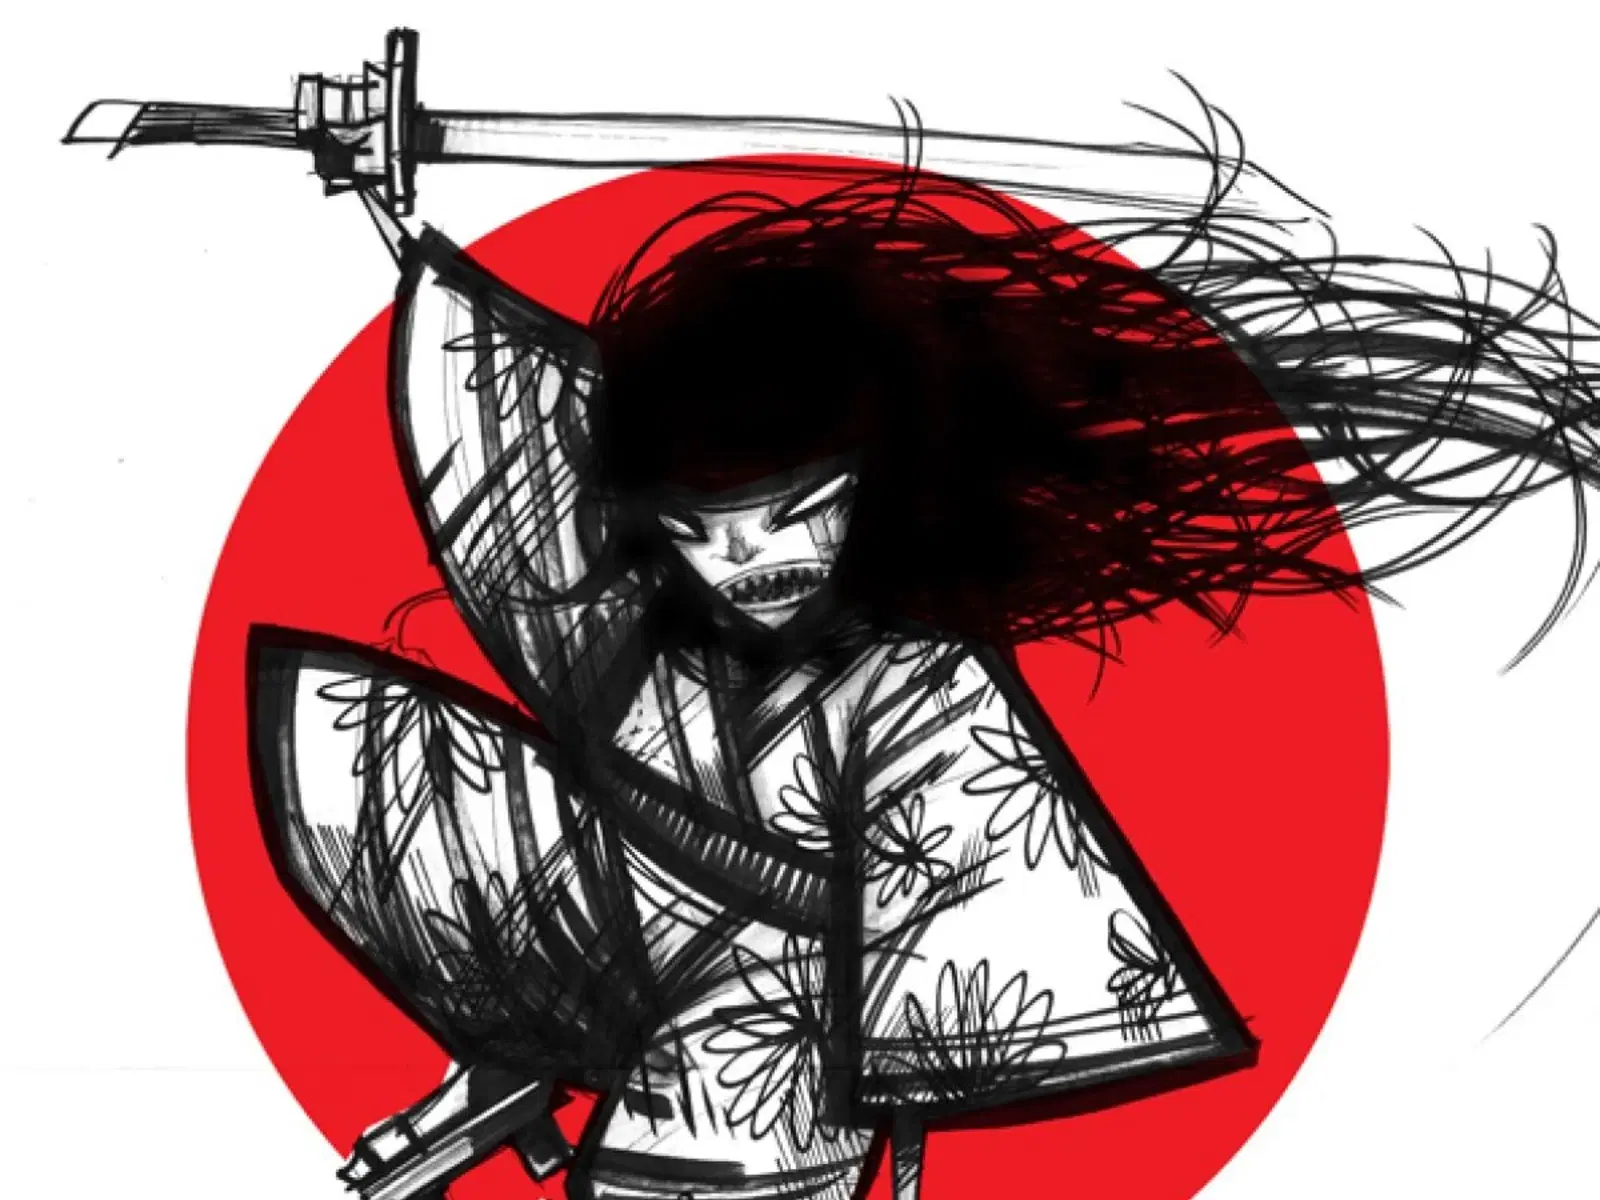 A fierce warrior in traditional attire, brandishing a sword overhead with determination, set against a striking red backdrop that highlights the action.